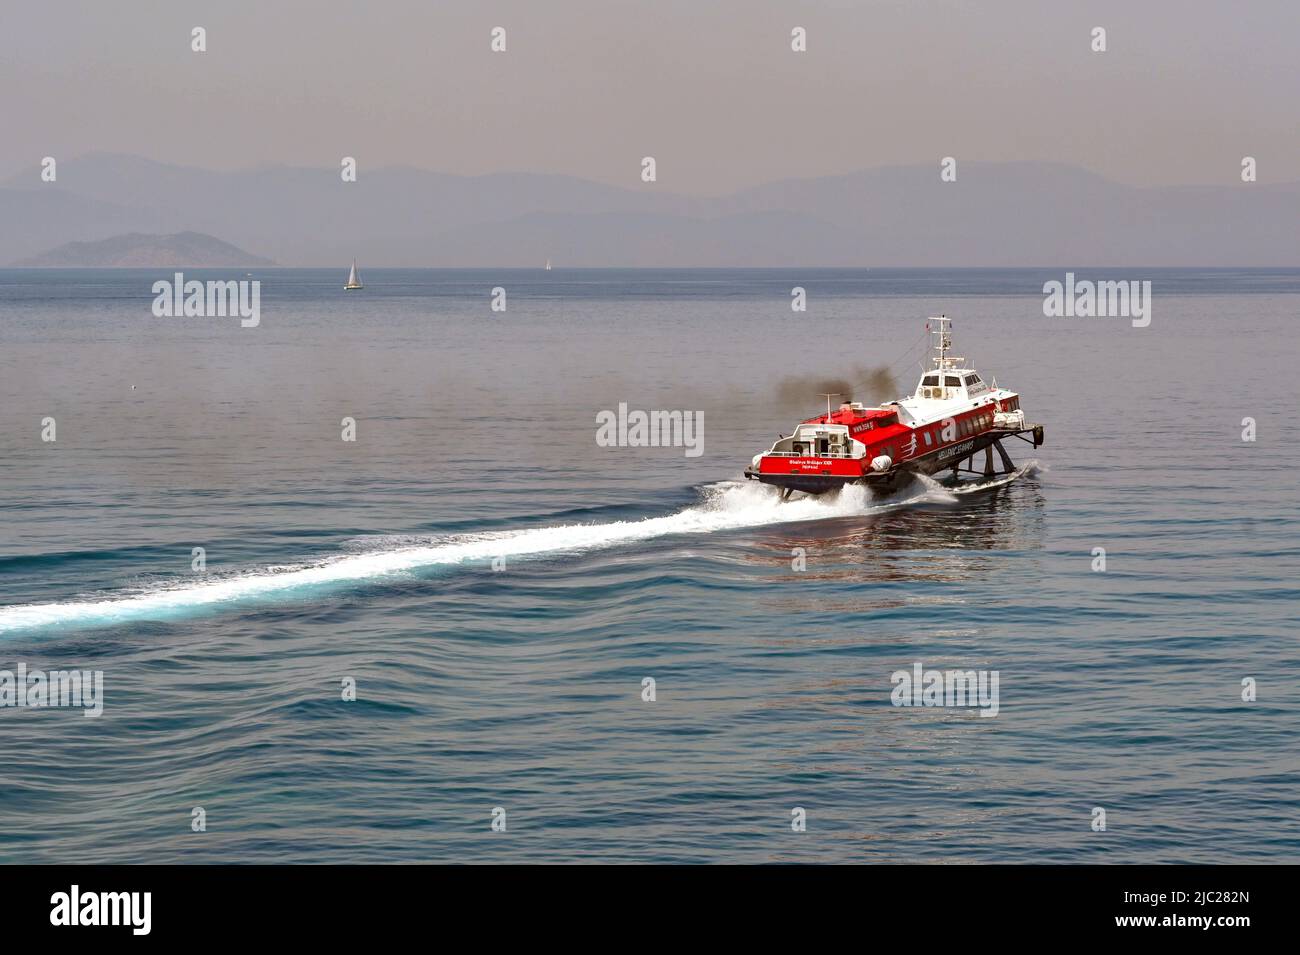 Aegina, Greece, - May 2022: Fast hydrofoil ferry accelerating with thick black smoke emerging from its funnels. Stock Photo